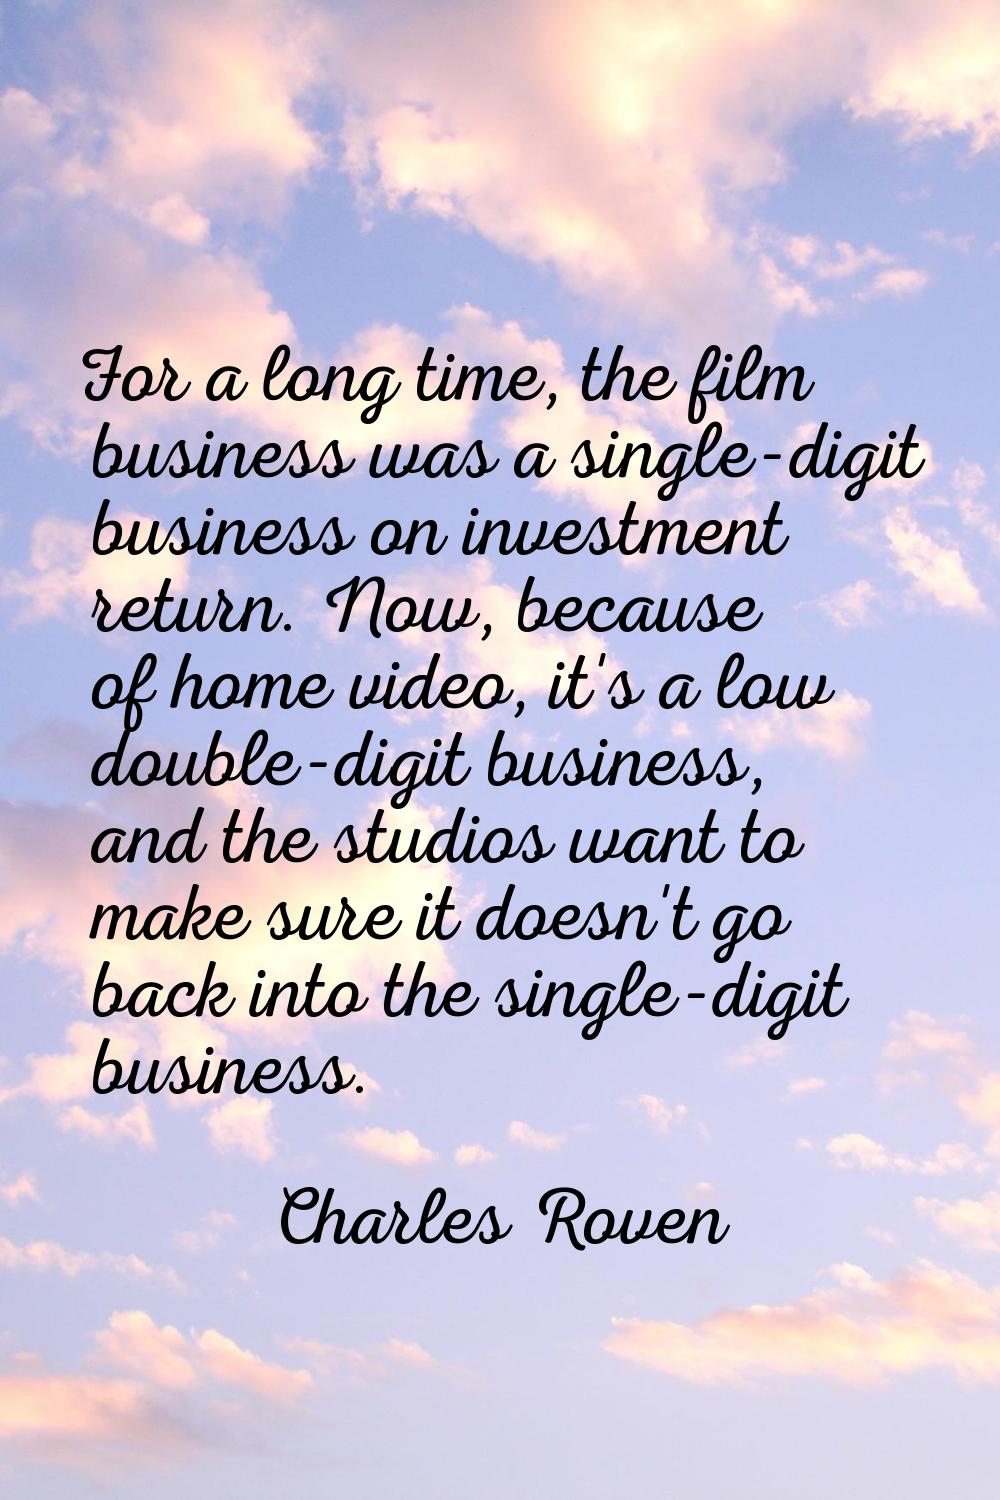 For a long time, the film business was a single-digit business on investment return. Now, because o